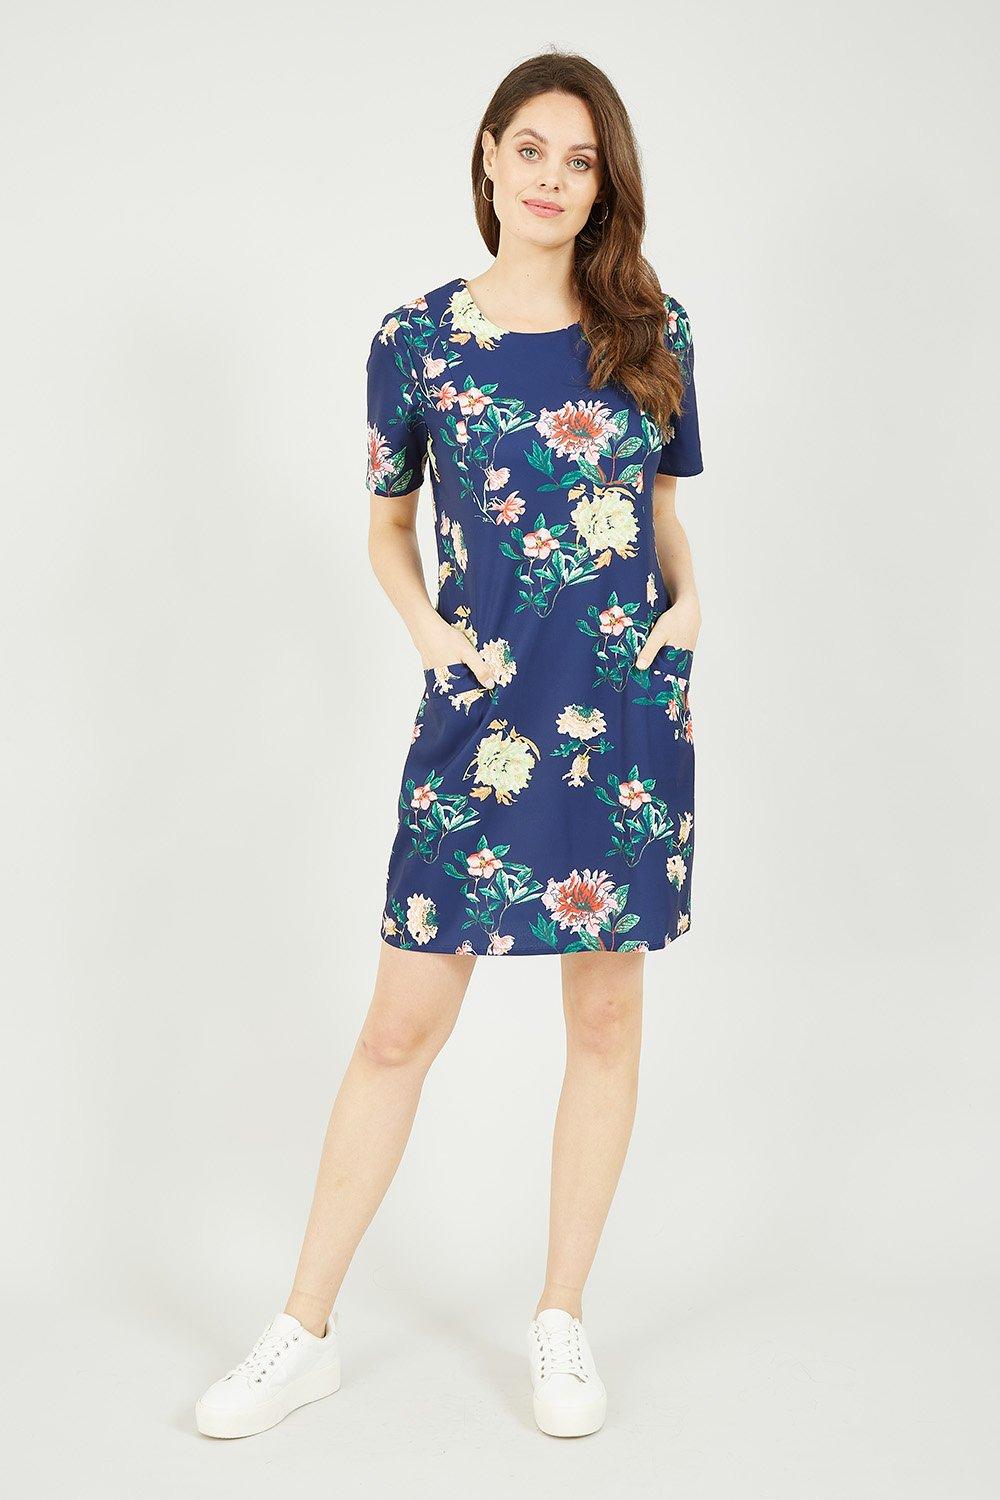 Navy Floral Blossom Print Tunic